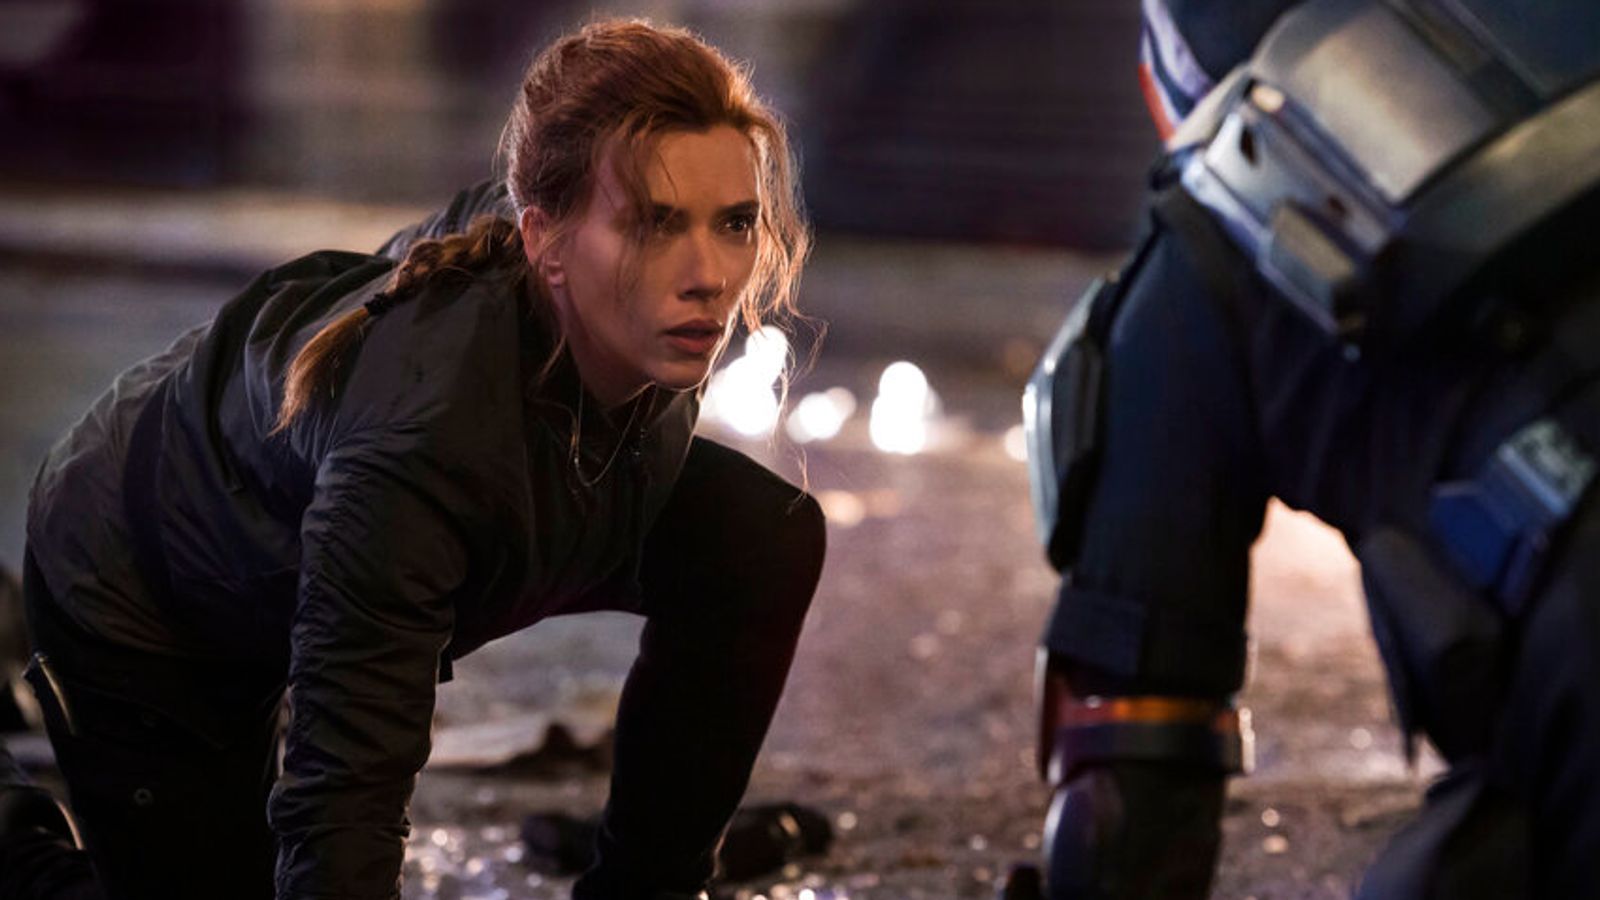 Scarlett Johansson sues Disney for streaming Black Widow at same time it was released in cinemas